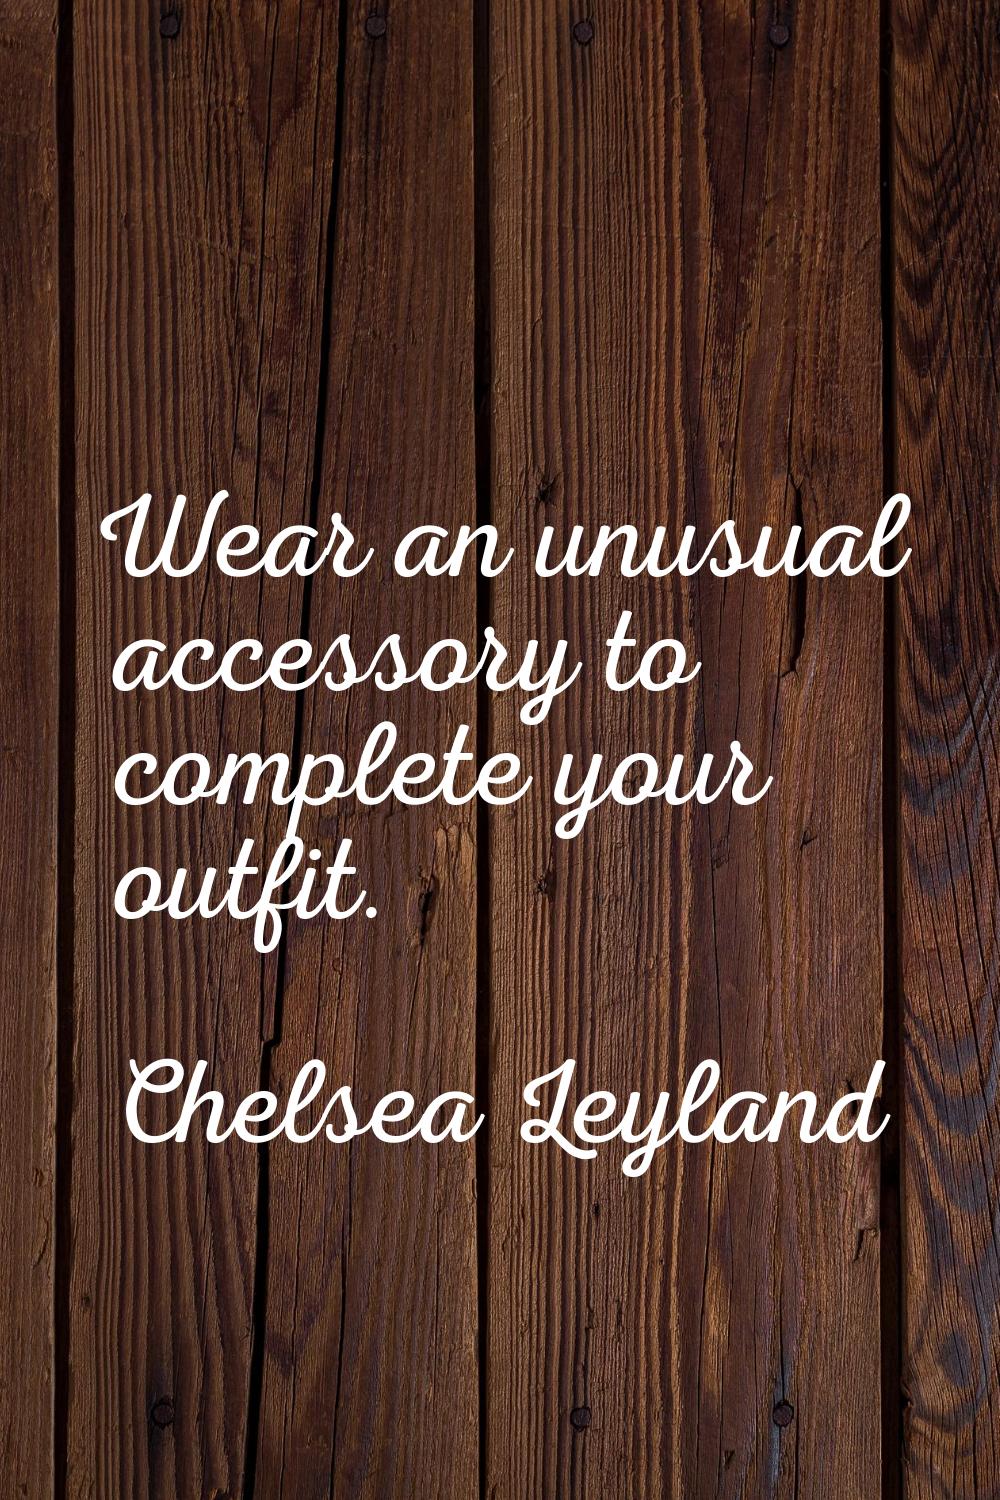 Wear an unusual accessory to complete your outfit.